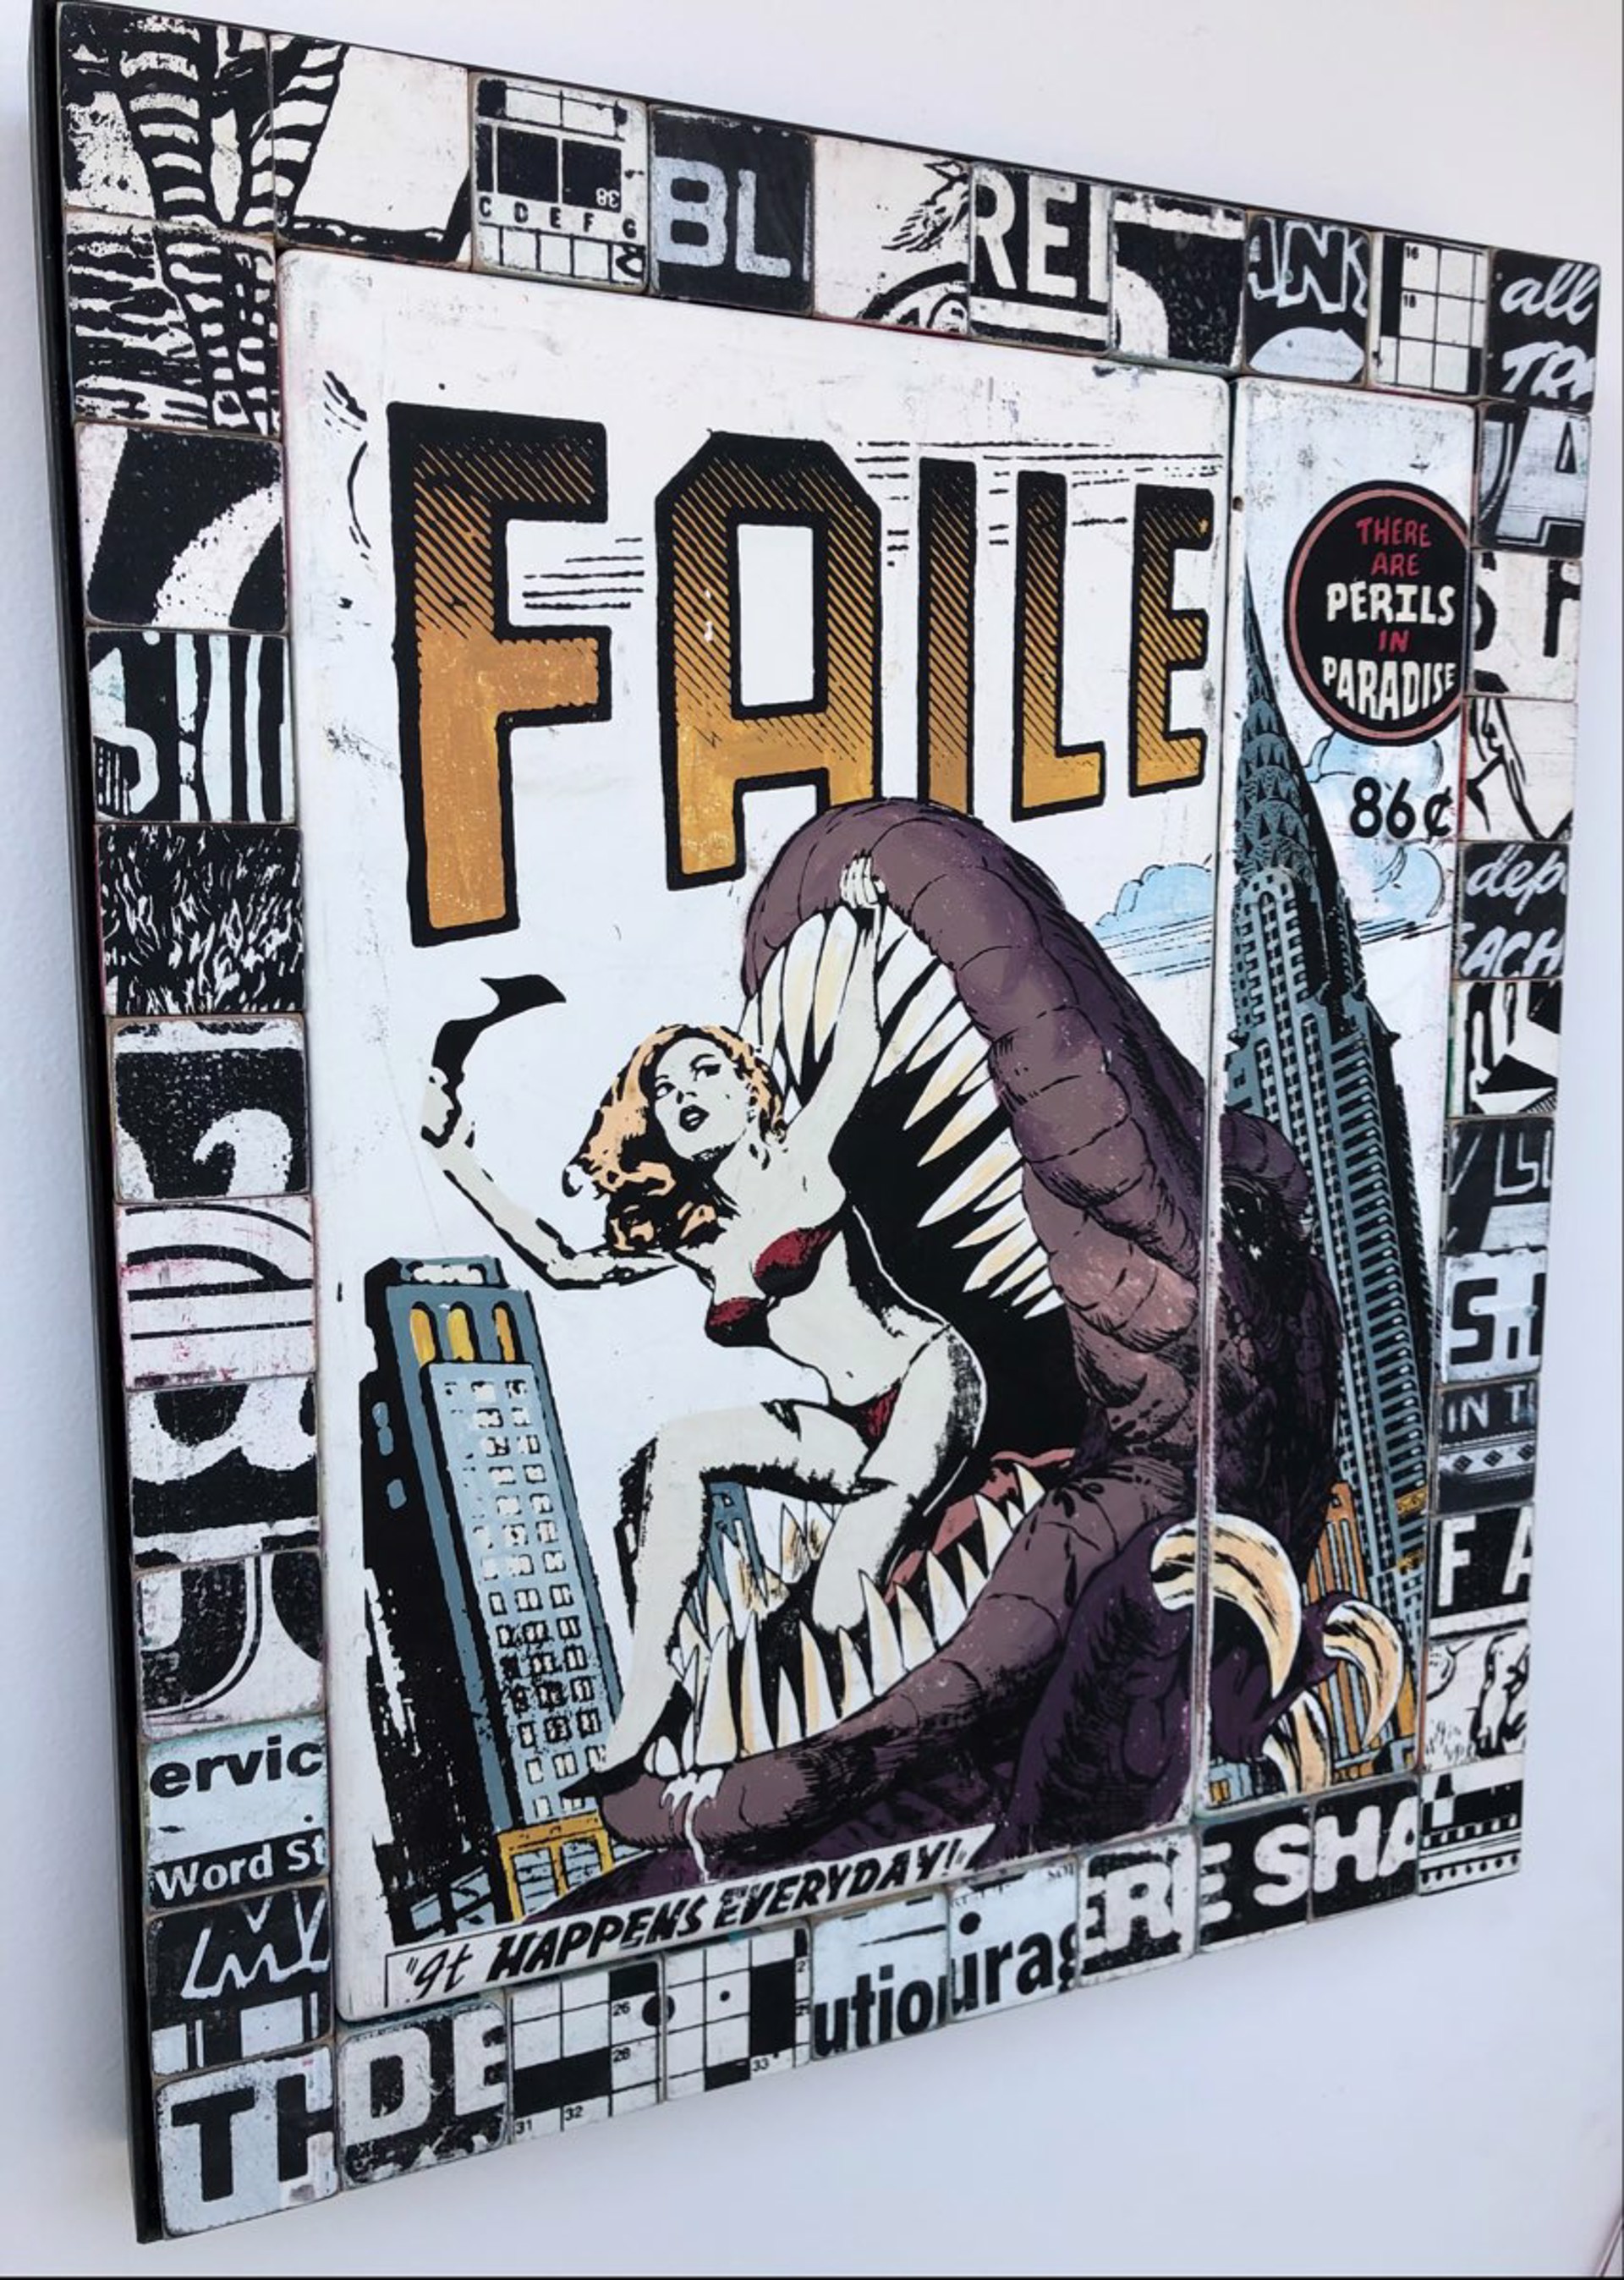 It Happens Everyday by FAILE